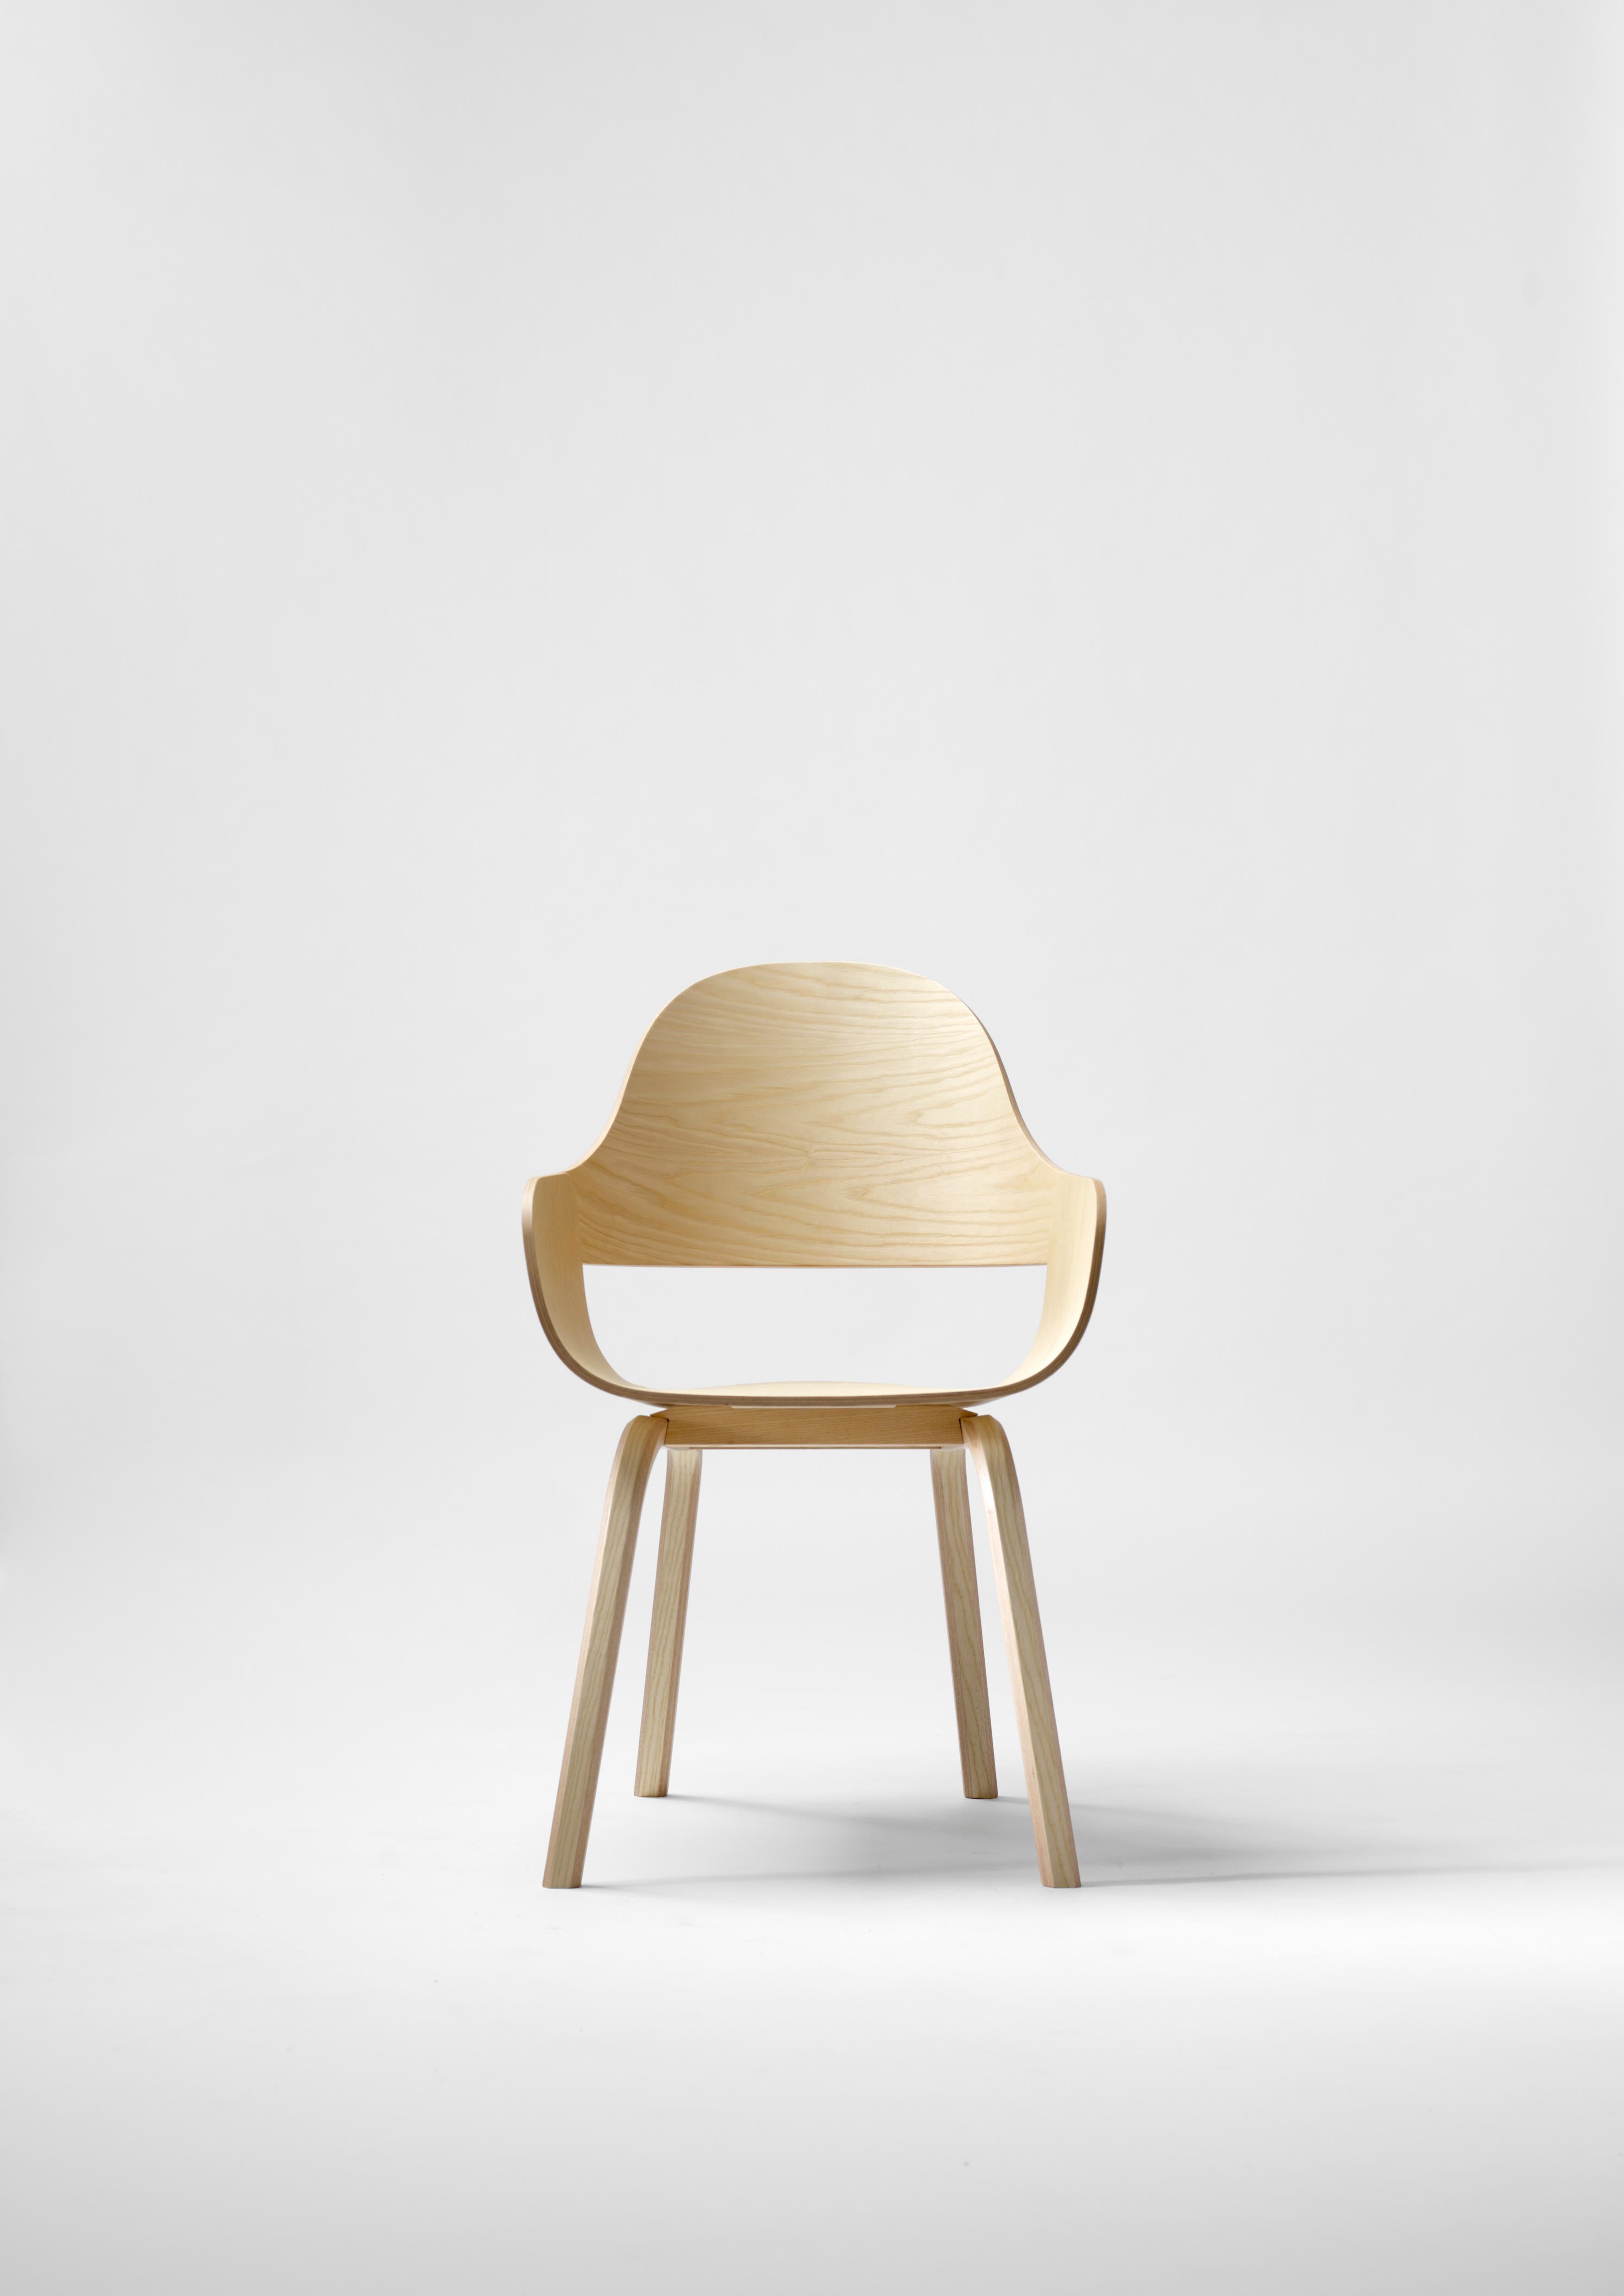 Powder coated steel or aluminium structure. Legs, seat and backrest in plywood with exteriors in natural ash. Metallic decorative buttons. 

A new version of the Showtime chair by Jaime Hayon which does not make the original design obsolete, but